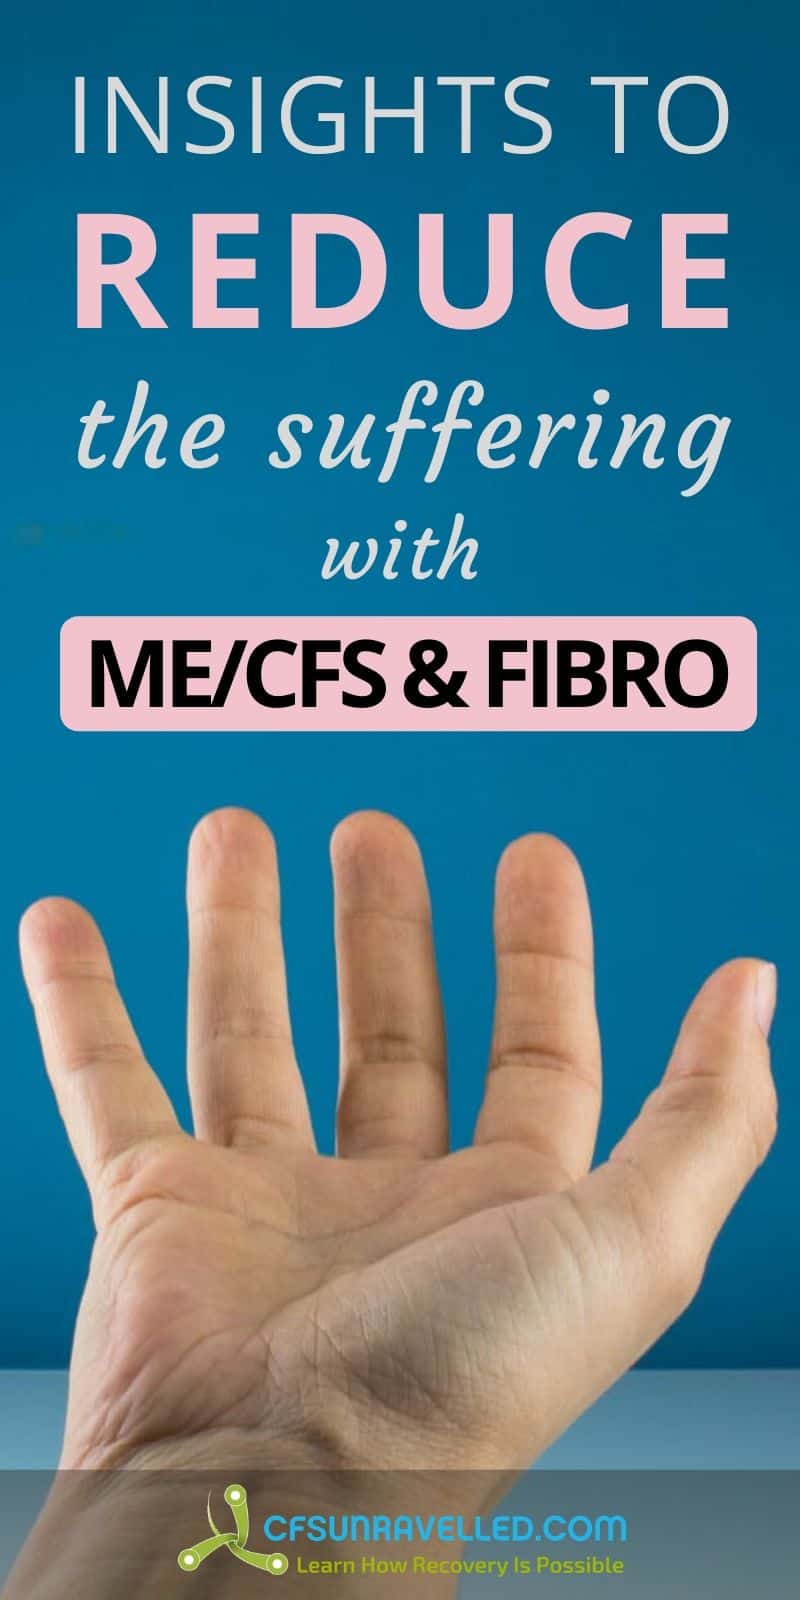 Hand image with insights to reduce the seffering with MECFS and Fibromyalgia text